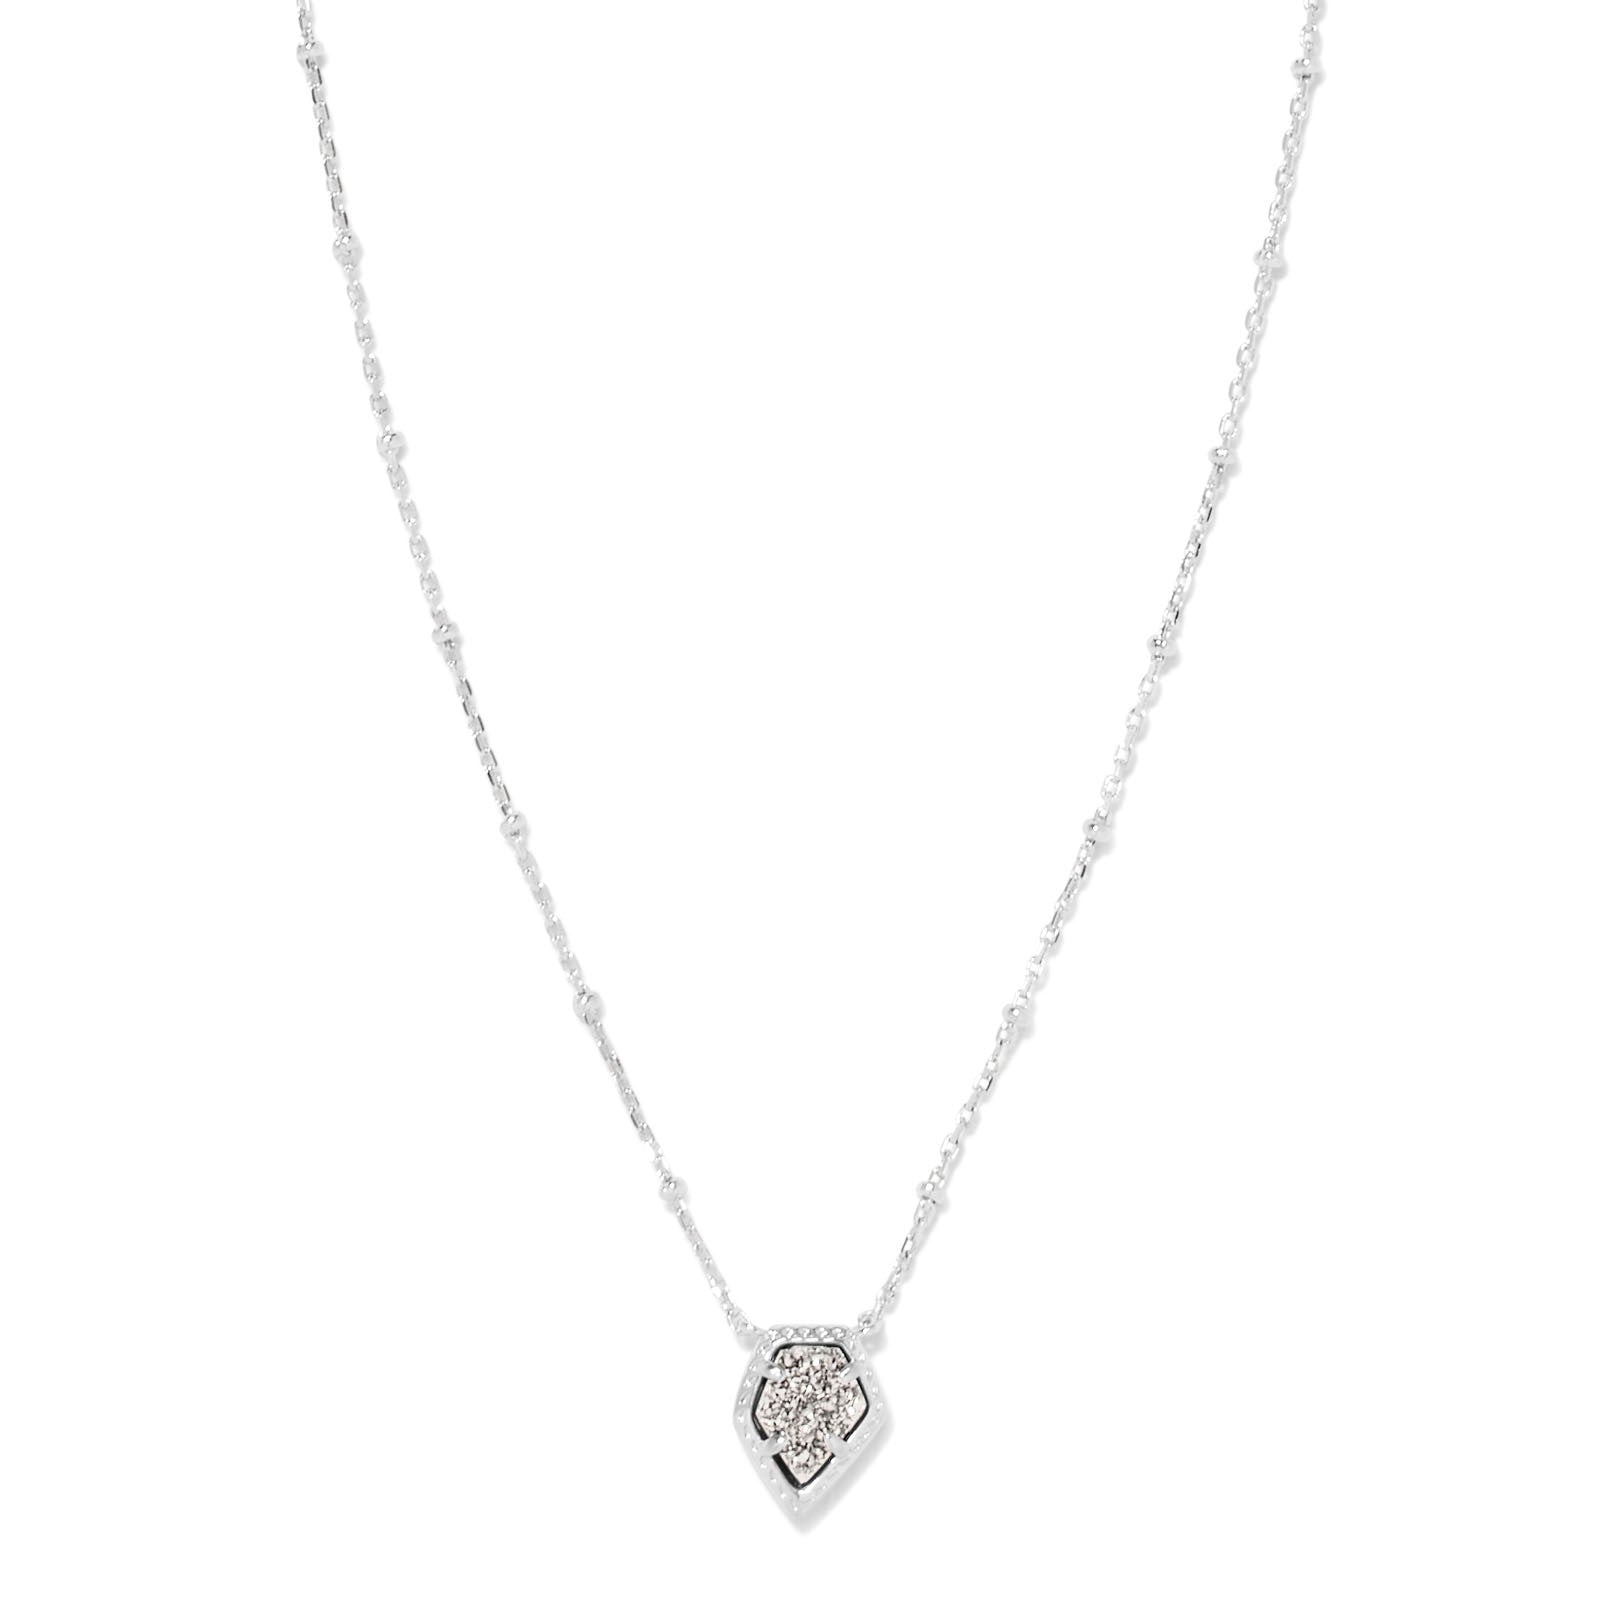 Kendra Scott | Framed Tess Silver Satellite Short Pendant Necklace in Platinum Drusy - Giddy Up Glamour Boutique